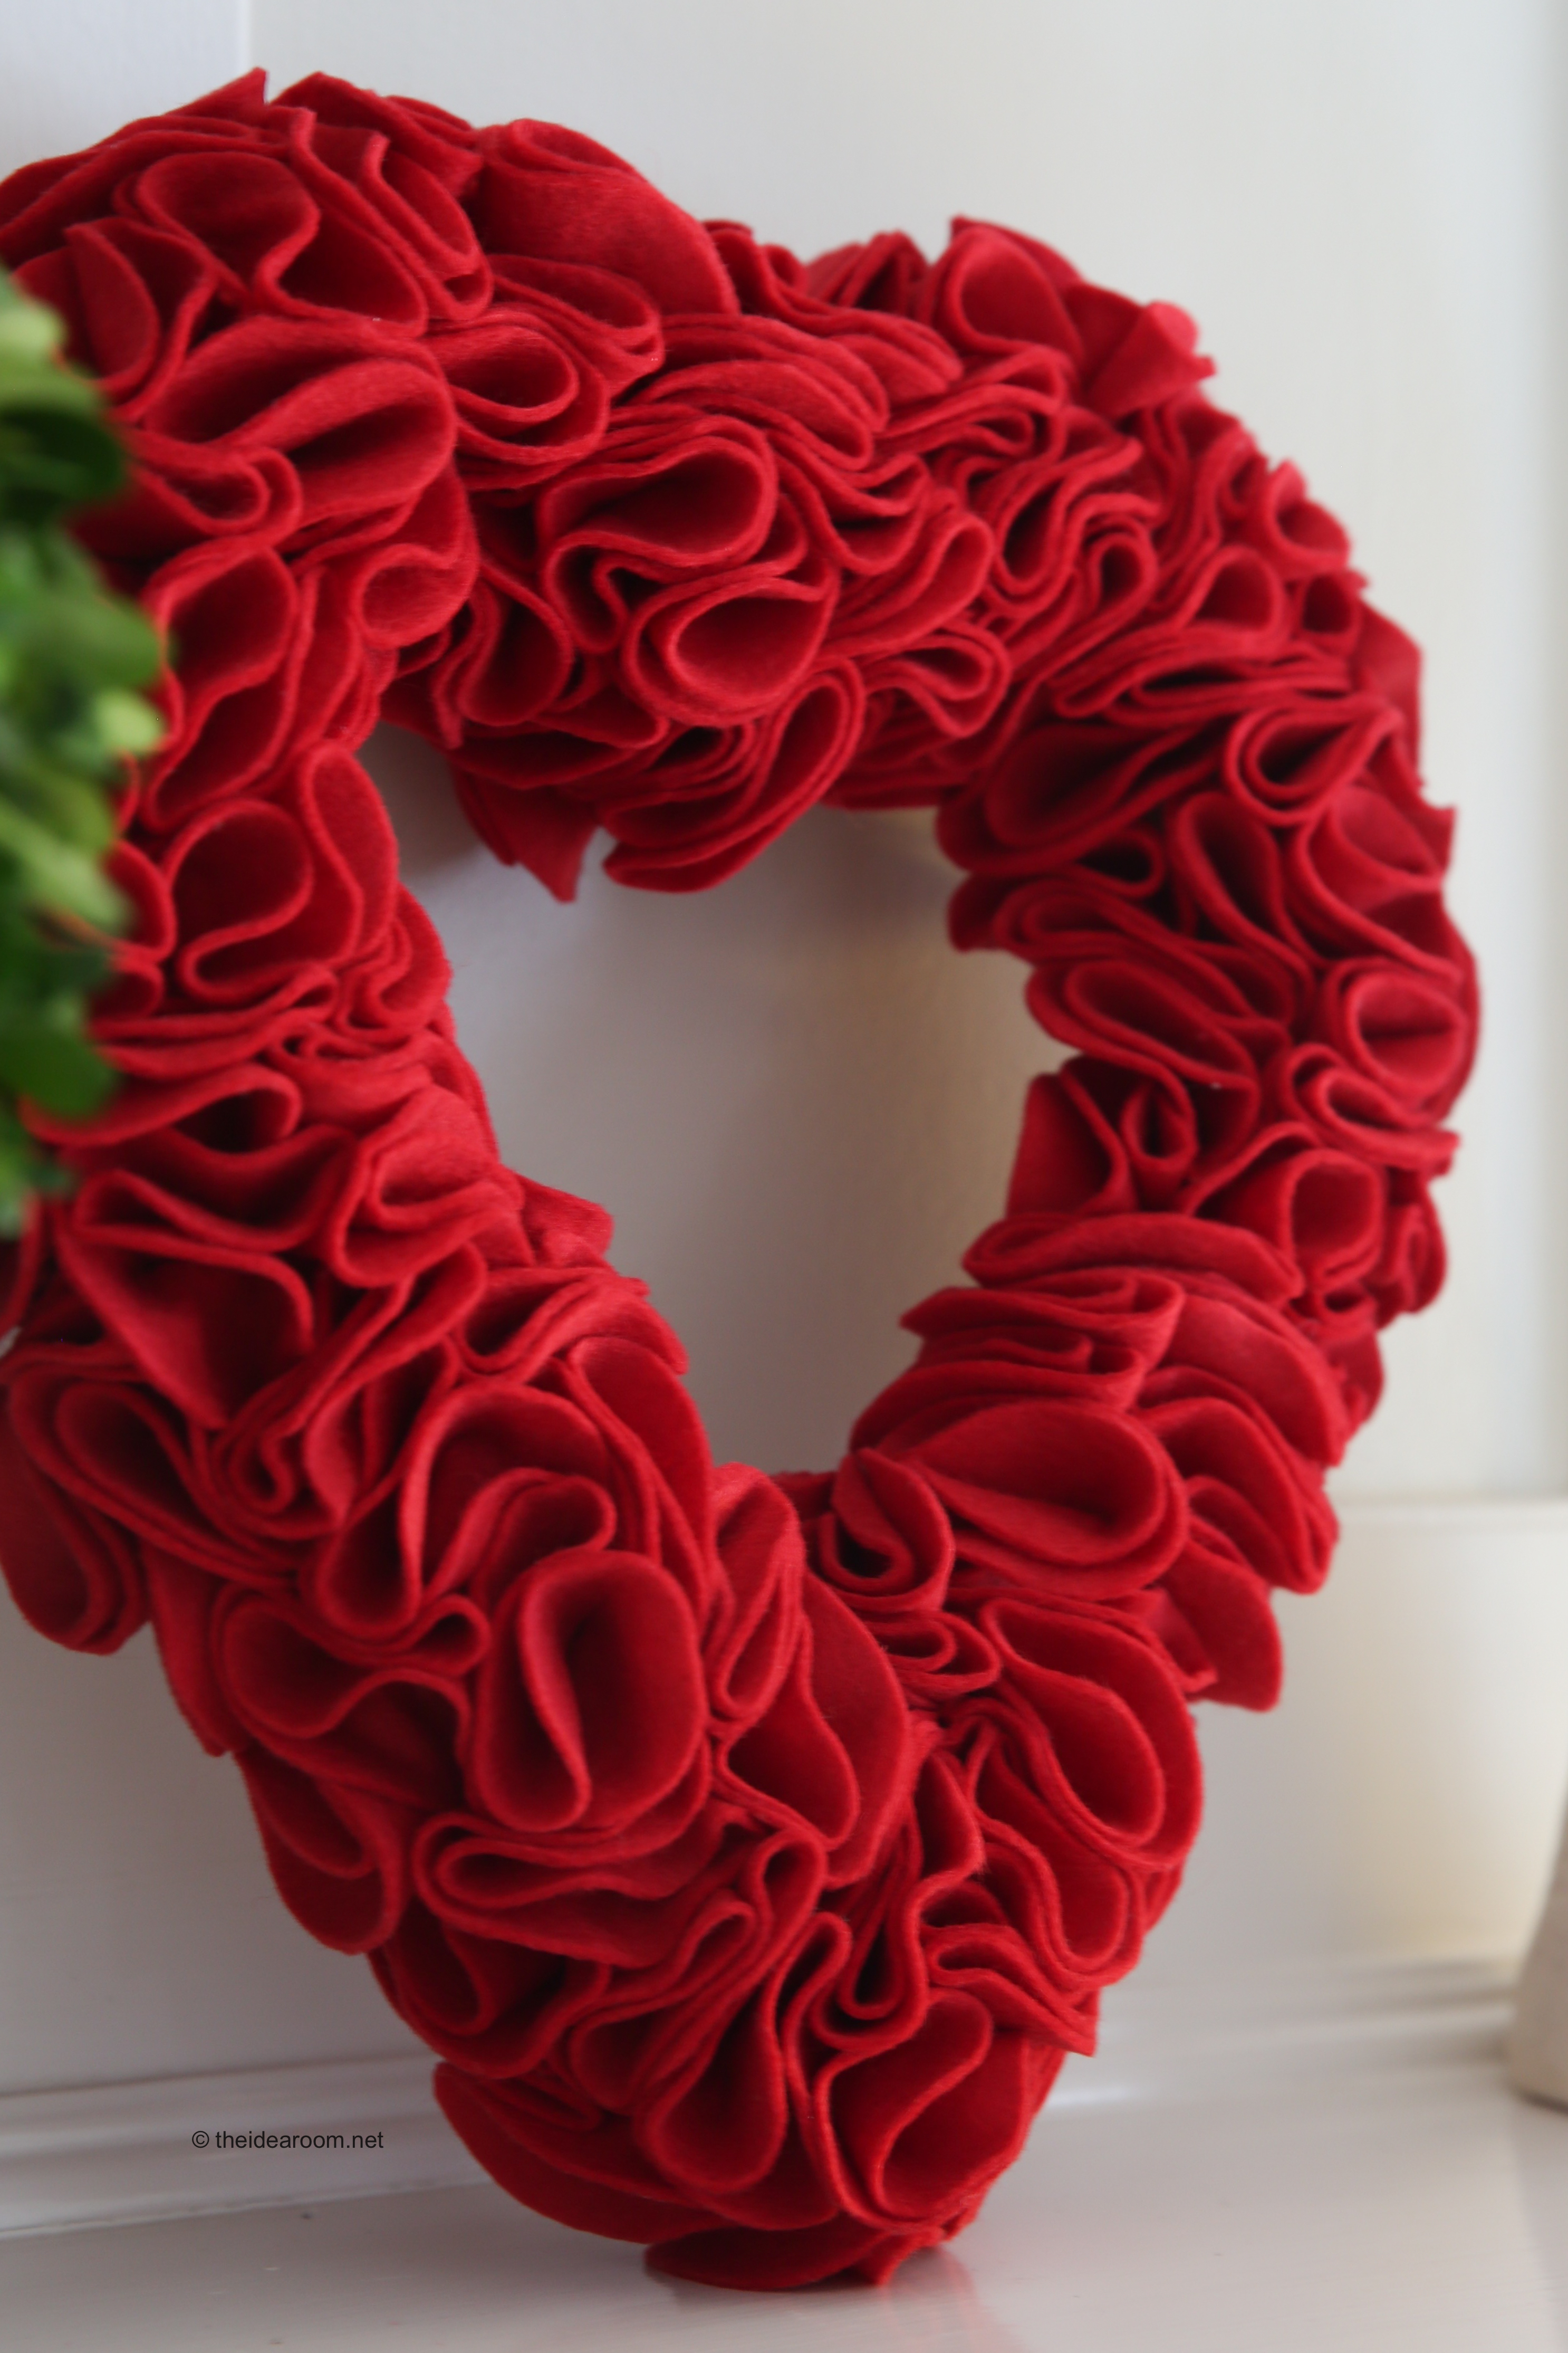 14 Vintage Rose Heart-Shaped Wreath by Valerie